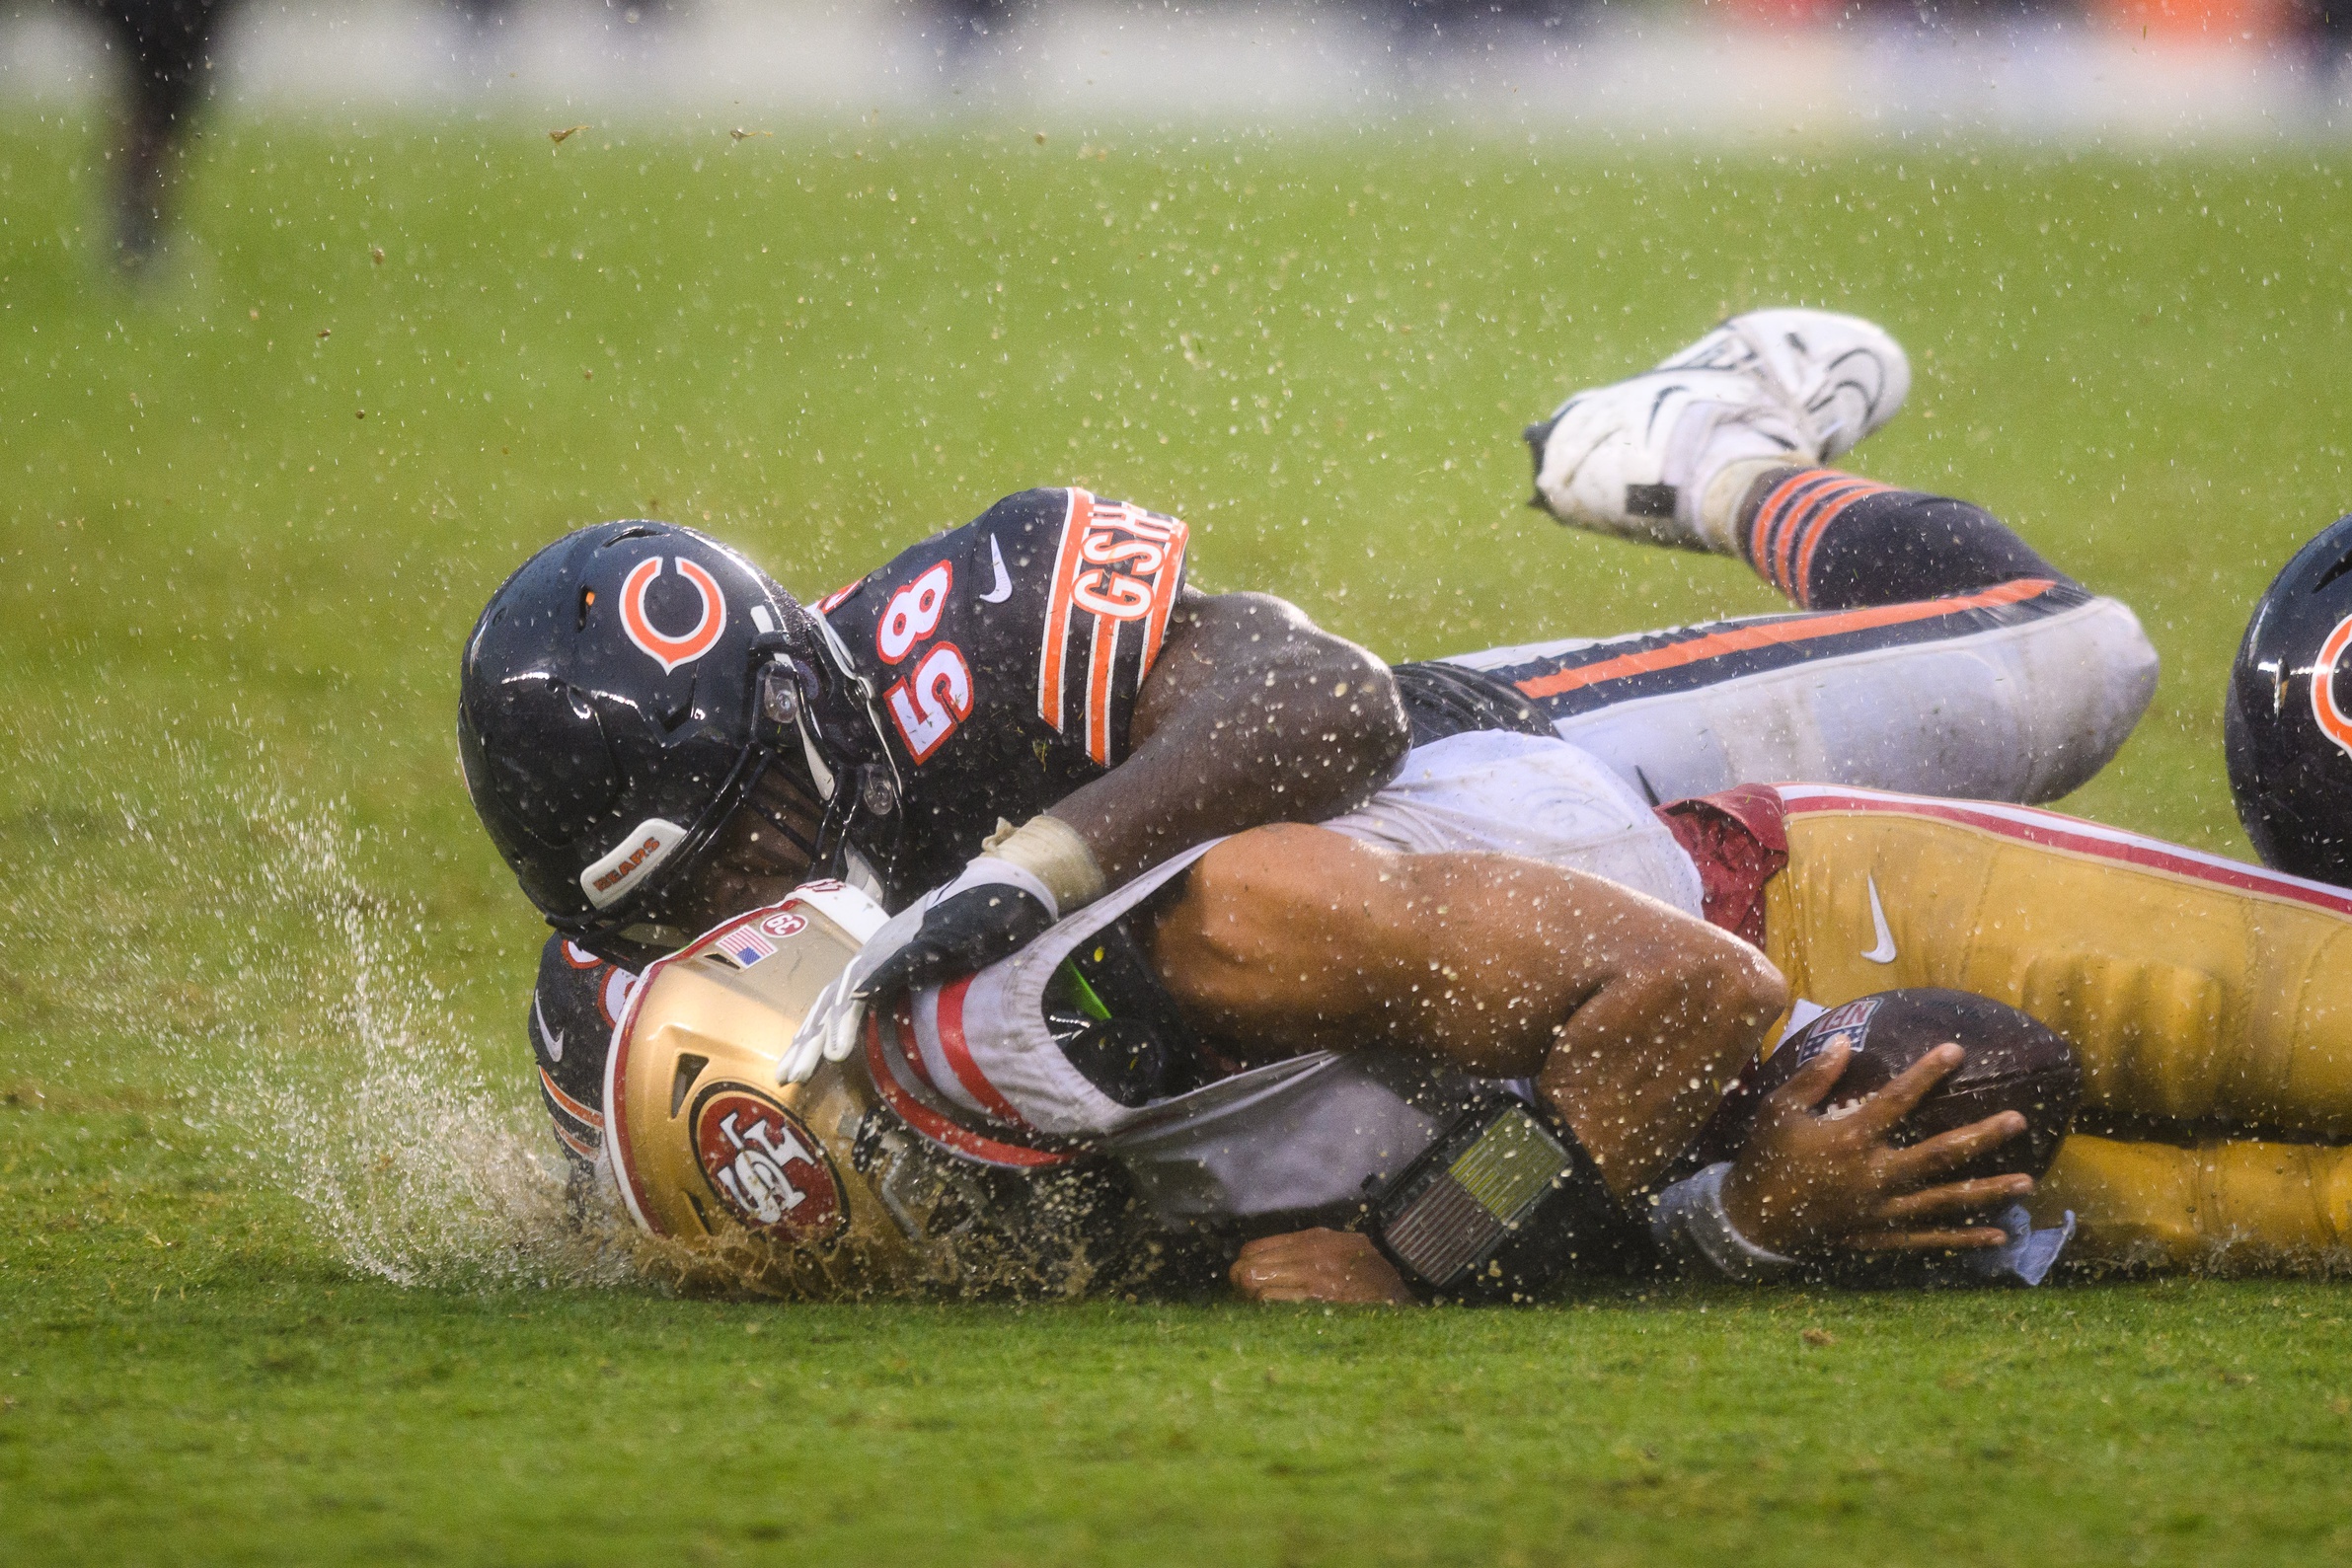 Sep 11, 2022; Chicago, Illinois, USA; San Francisco 49ers quarterback Trey Lance (5) is tackled after a run by Chicago Bears inside linebacker Roquan Smith (58) in the fourth quarter at Soldier Field. Mandatory Credit: Daniel Bartel-USA TODAY Sports